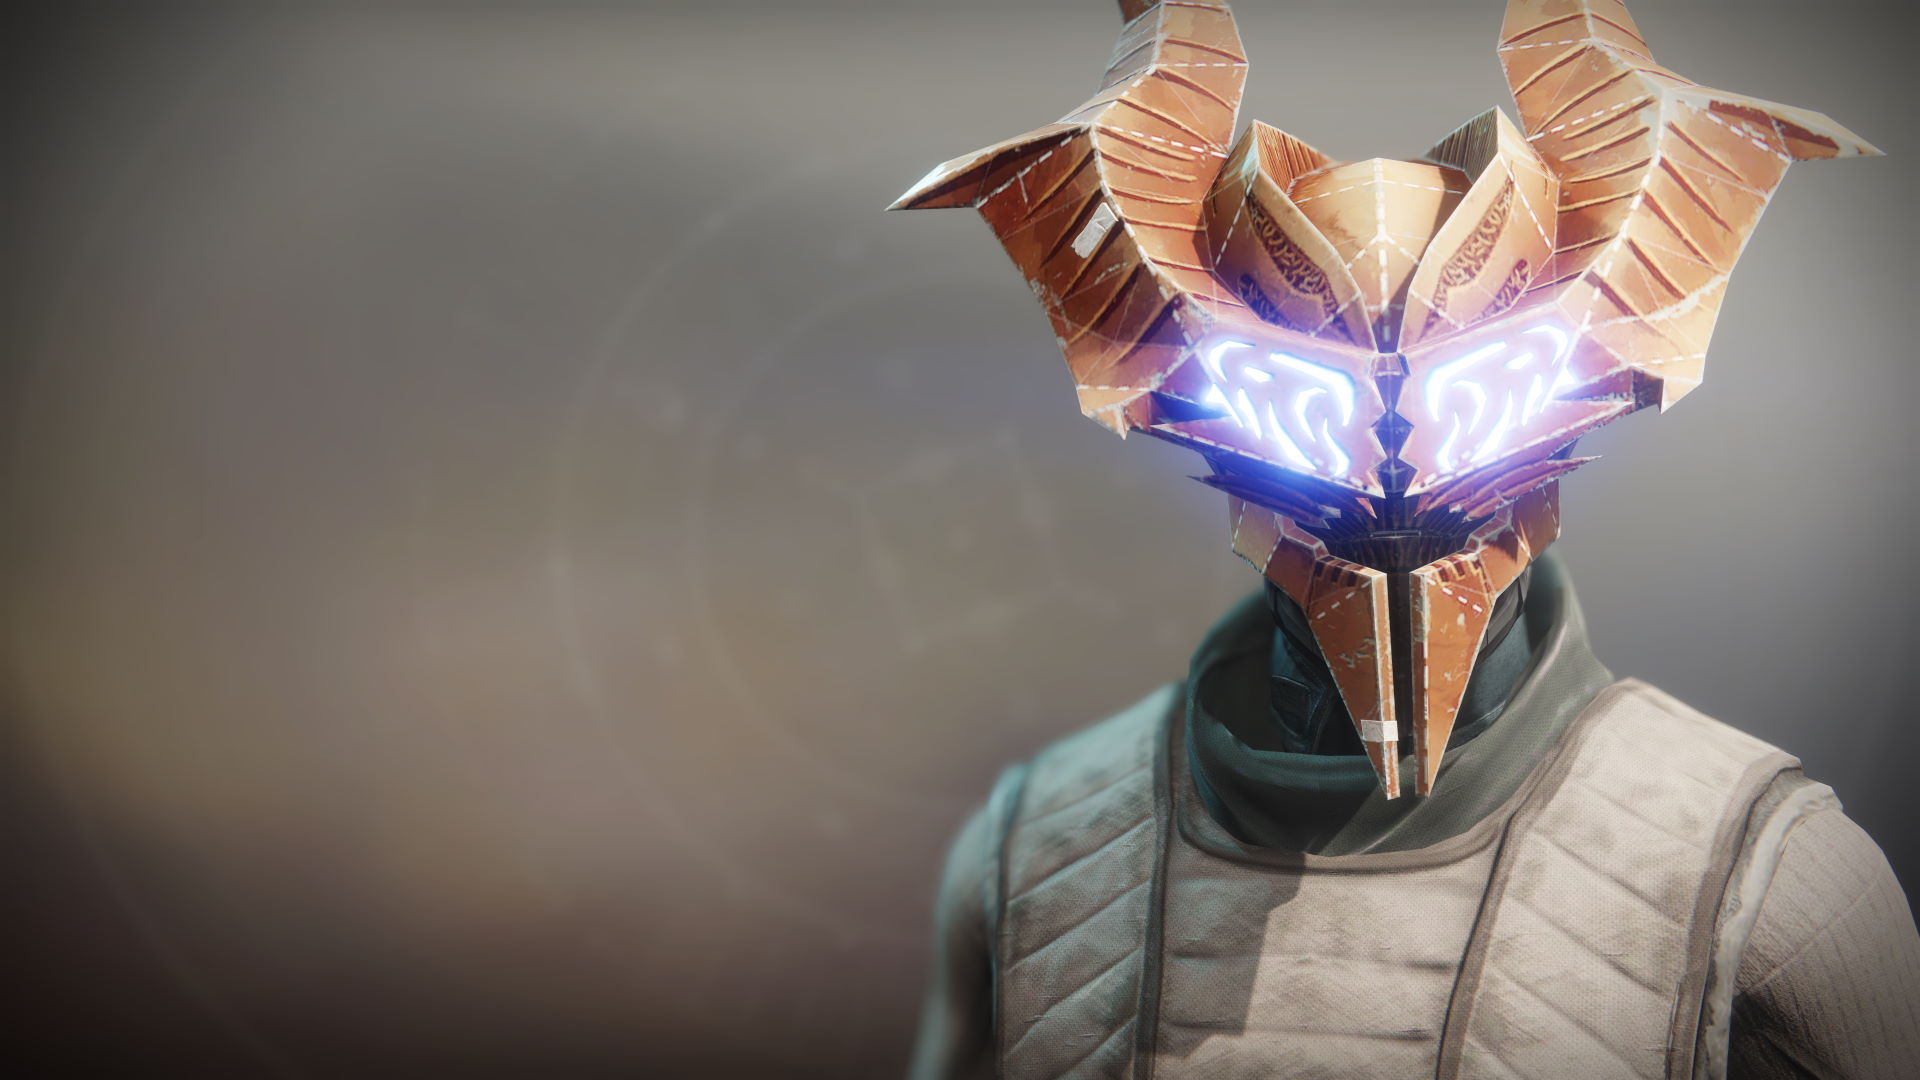 An in-game render of the Omnigul Mask.